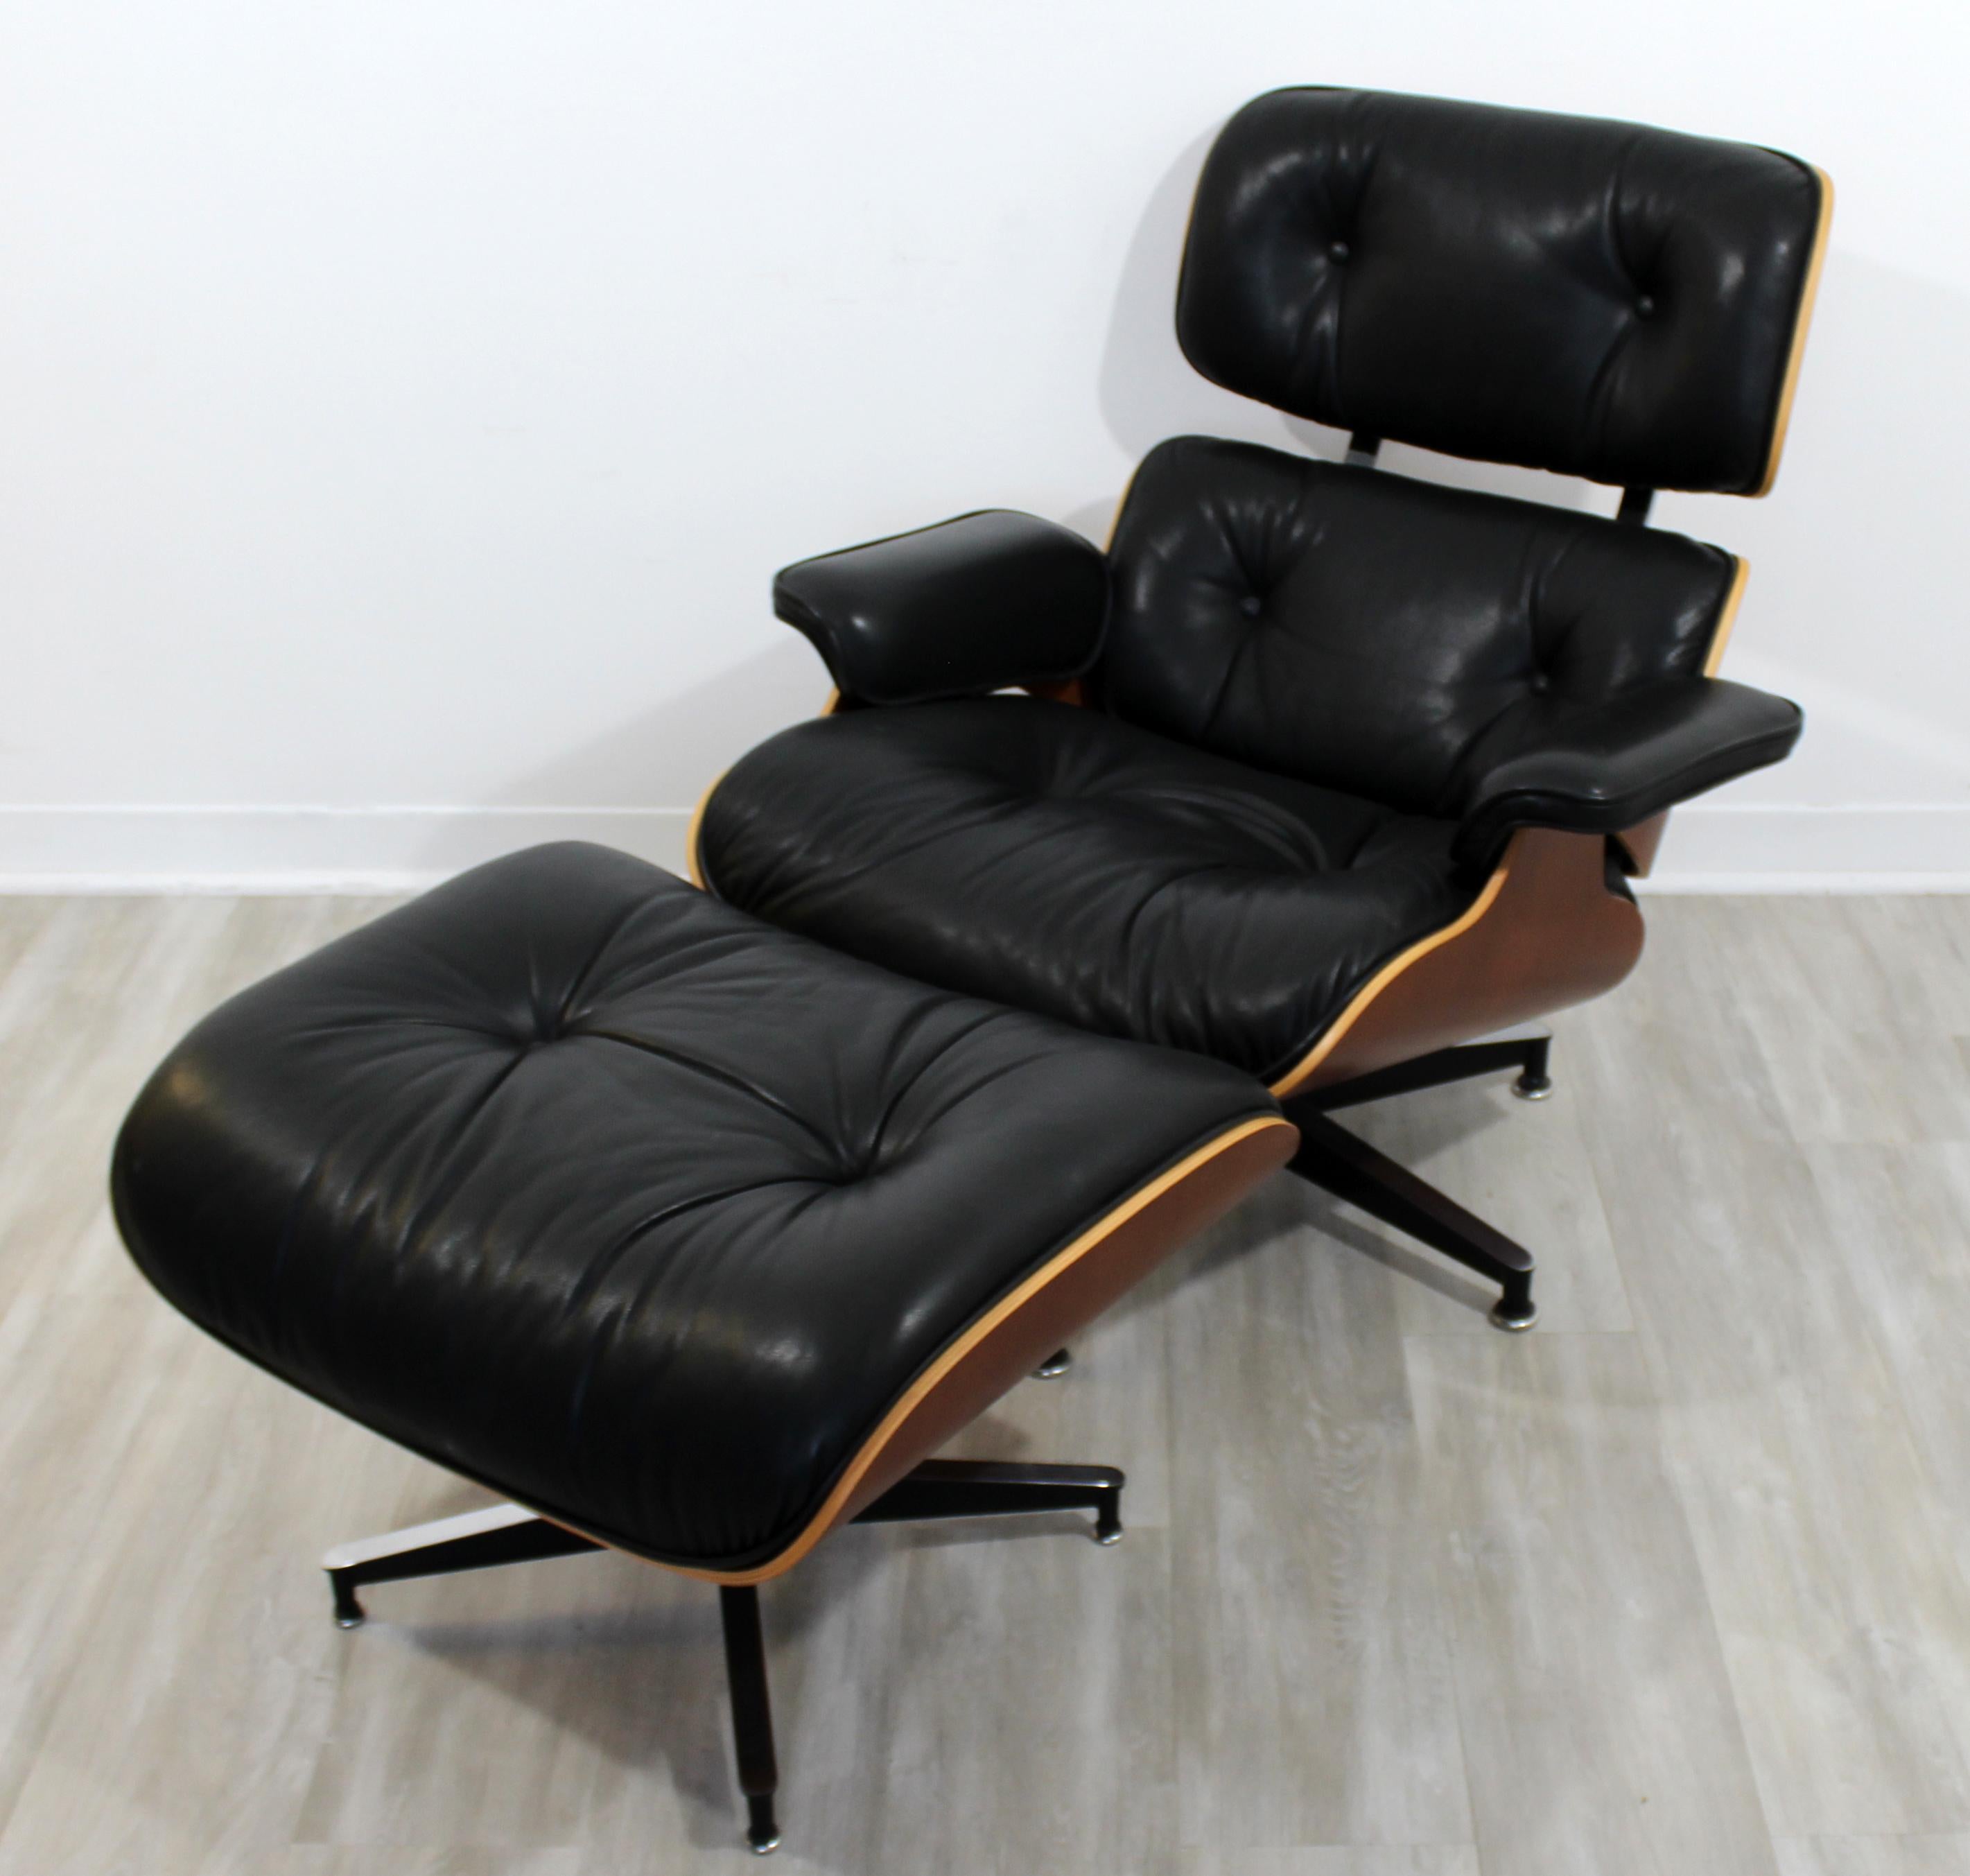 For your consideration is a phenomenal, Charles Eames for Herman Miller iconic, walnut and black leather armchair and matching ottoman, circa 1980s. In excellent vintage condition. The dimensions of the chair are 32.5